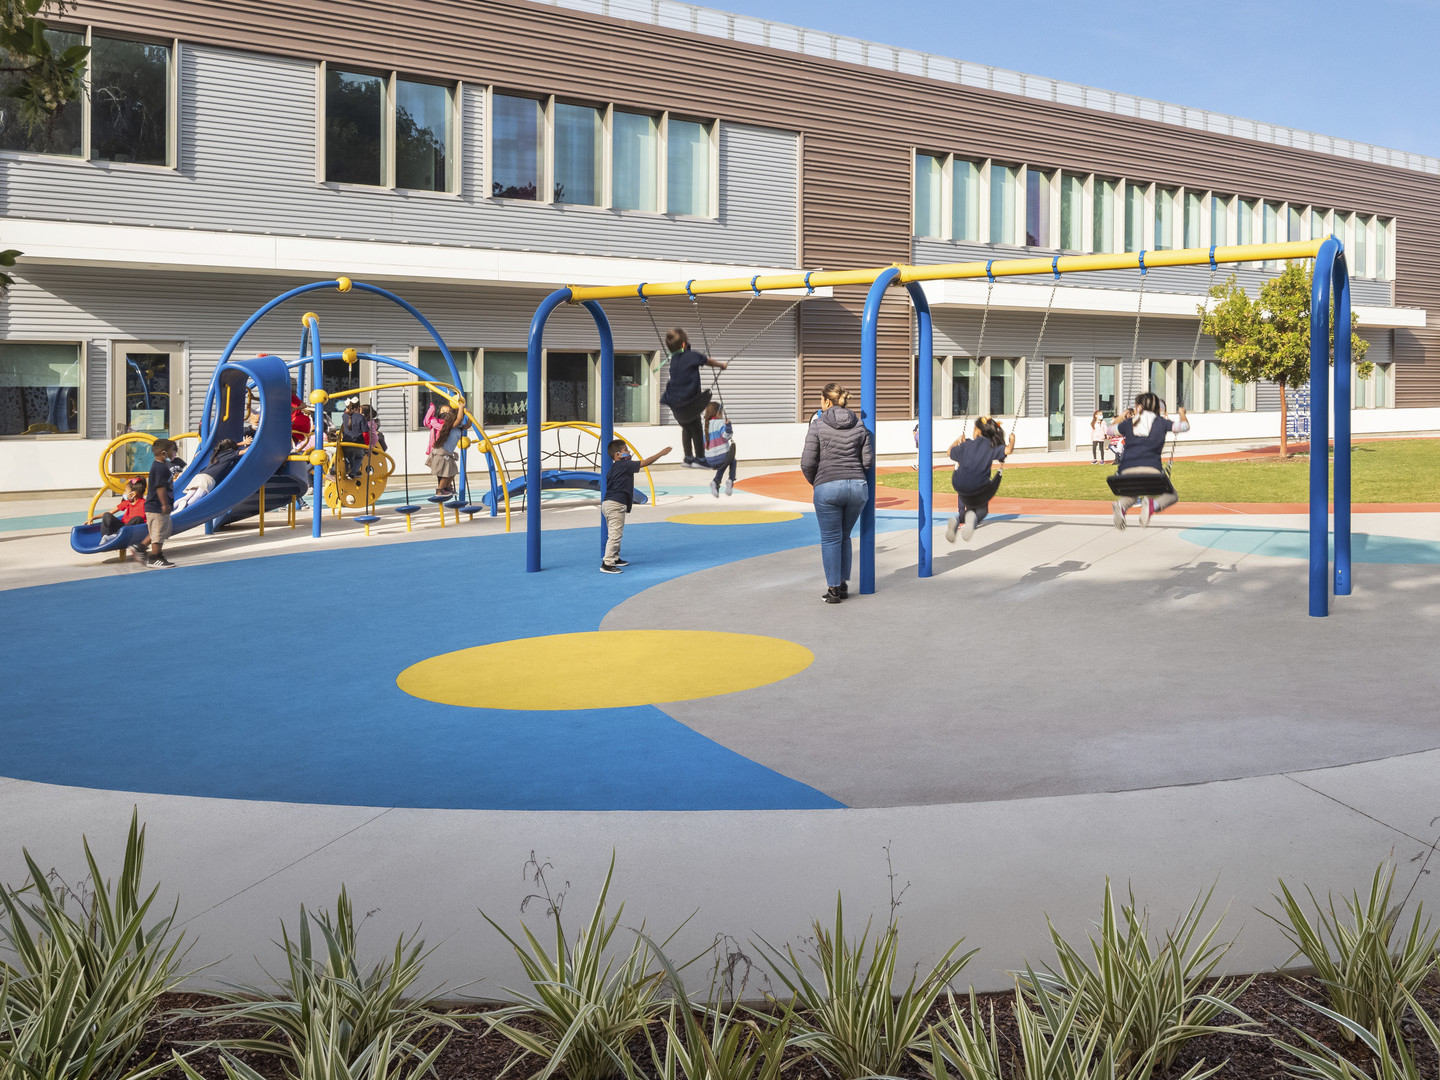 Blue and yellow playground with geometric abstract pattern to padded ground. Surrounded by greenery and backed by 2 story school